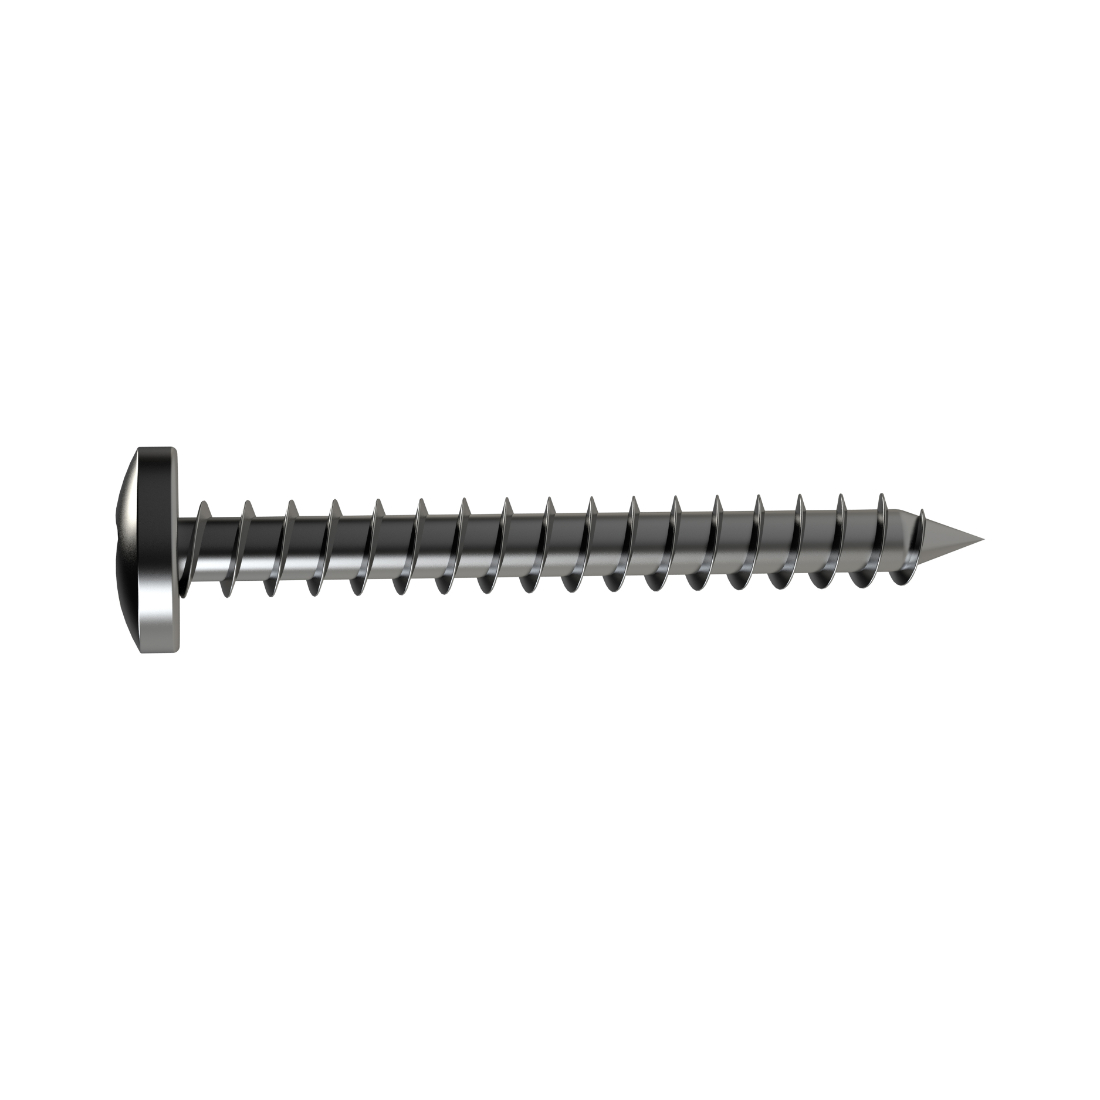 Self Tapping Screw 10g X 20mm Pan Head Square Drive T304 Stainless